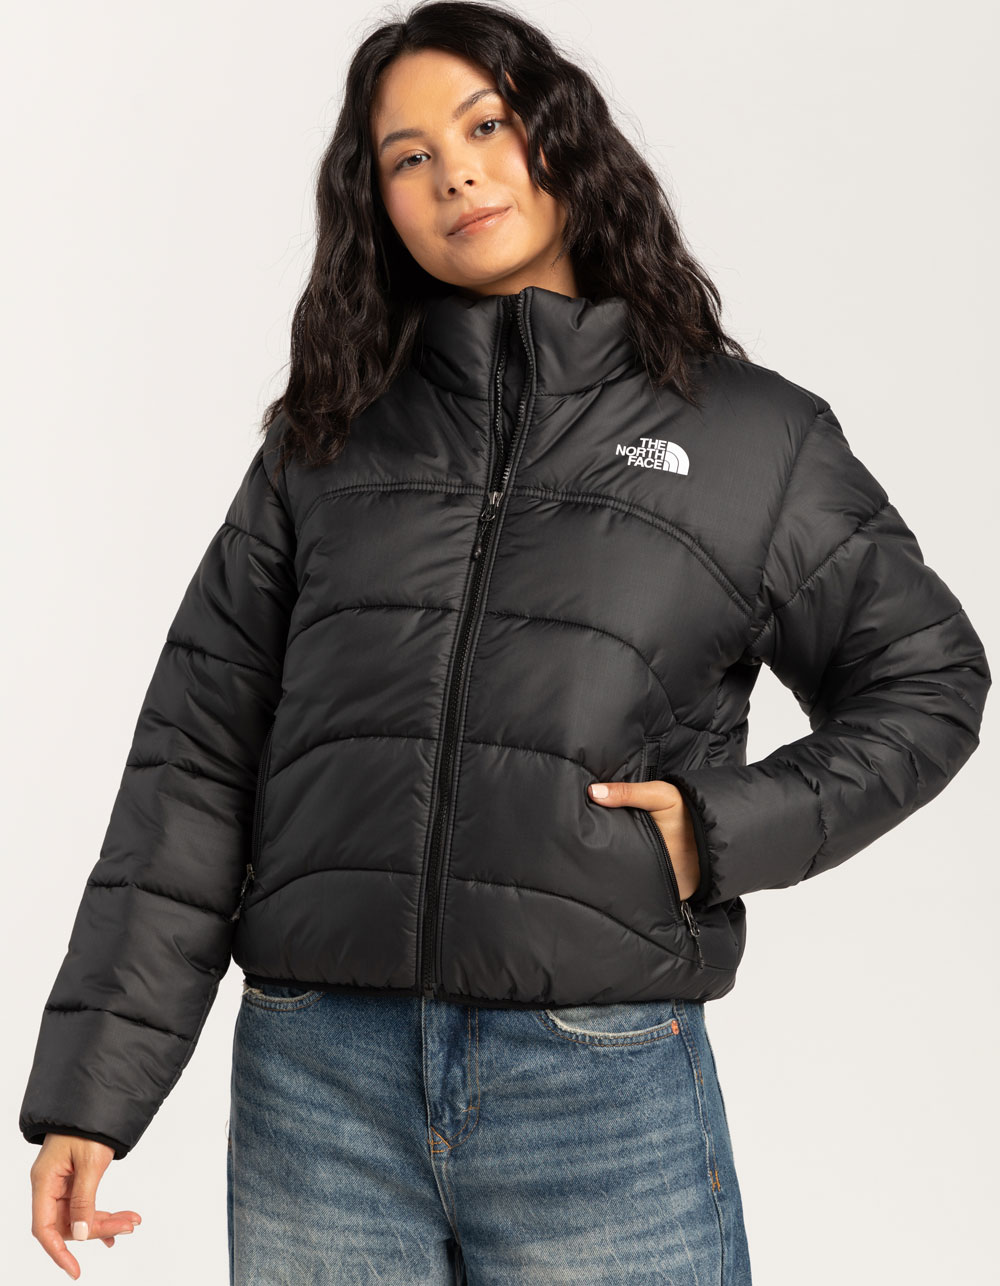 THE NORTH FACE TNF 2000 Womens Jacket - BLACK | Tillys